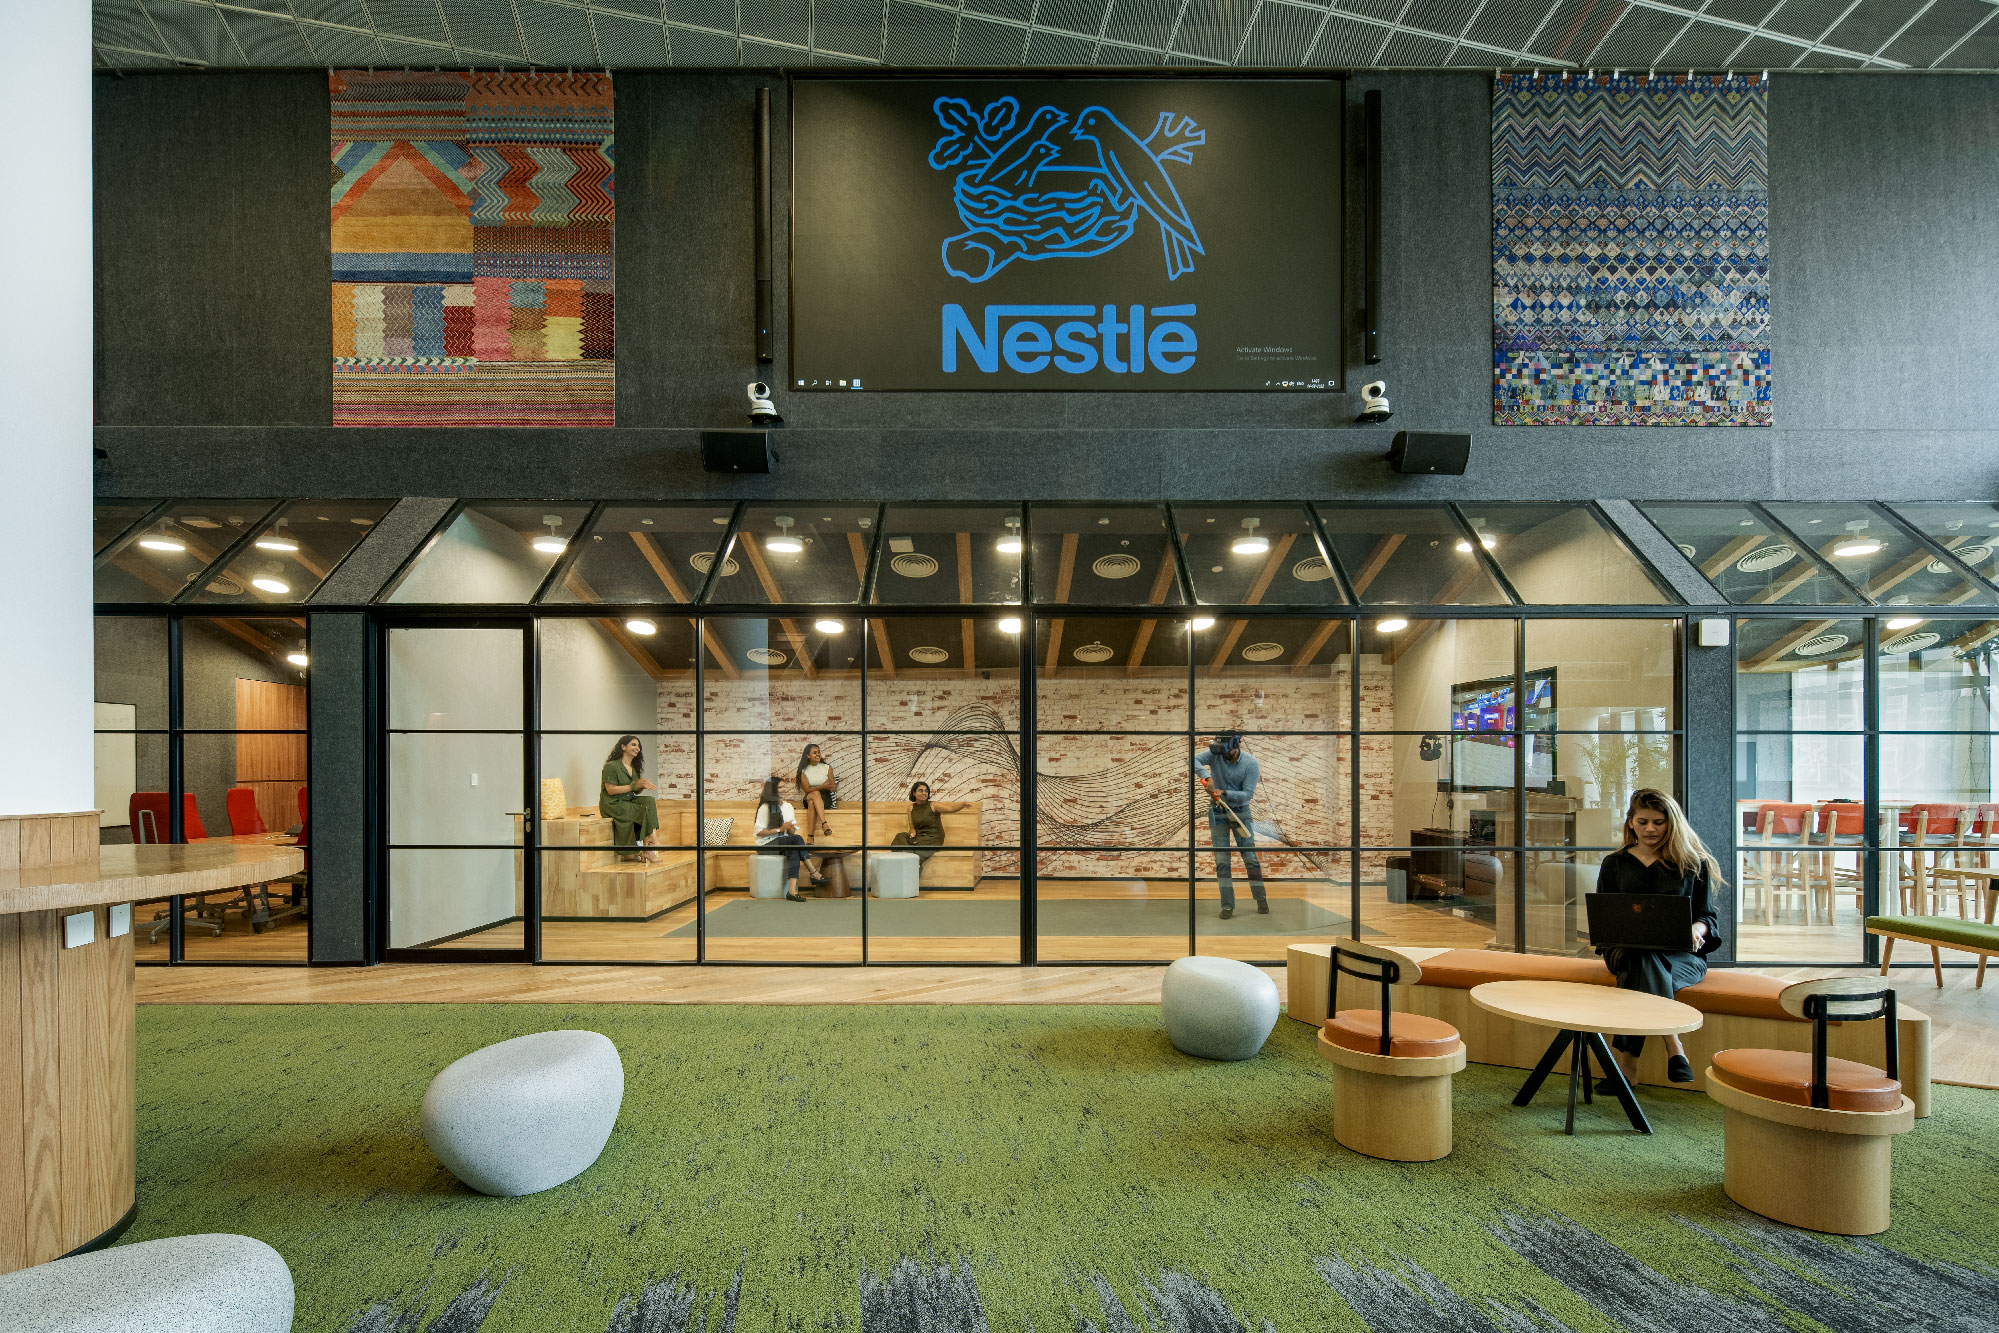 Nestle Gurugram dynamic zone:A dynamic workspace designed to foster growth and well-being for Nestle employees